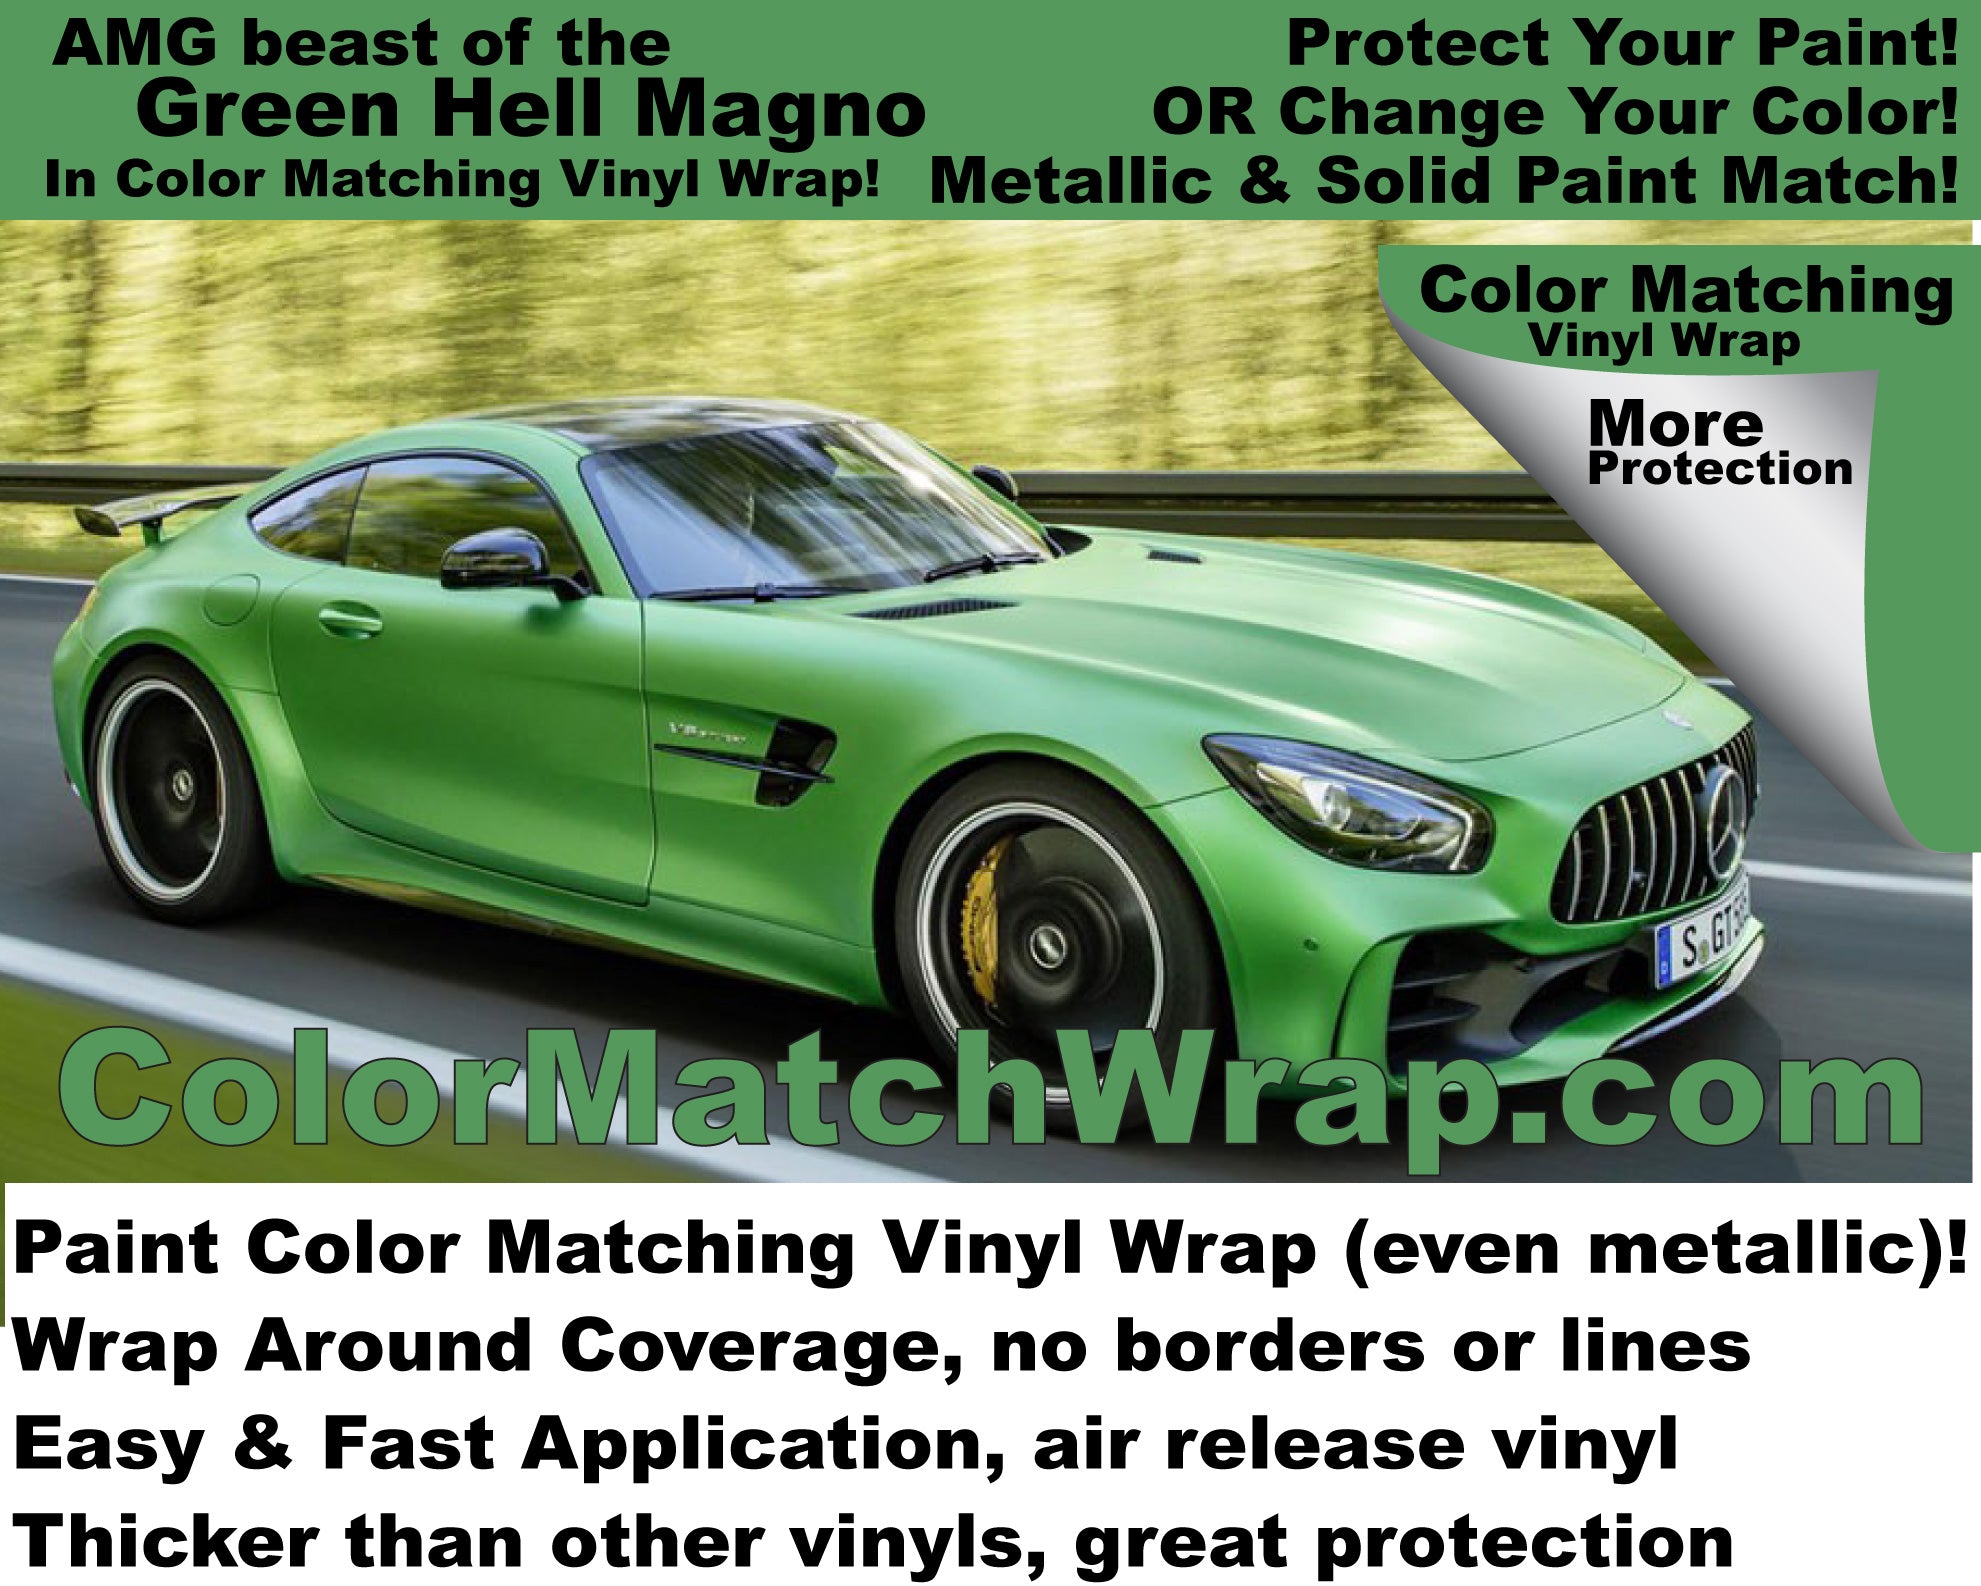 amg gt r beast of the green hell vinyl wrap